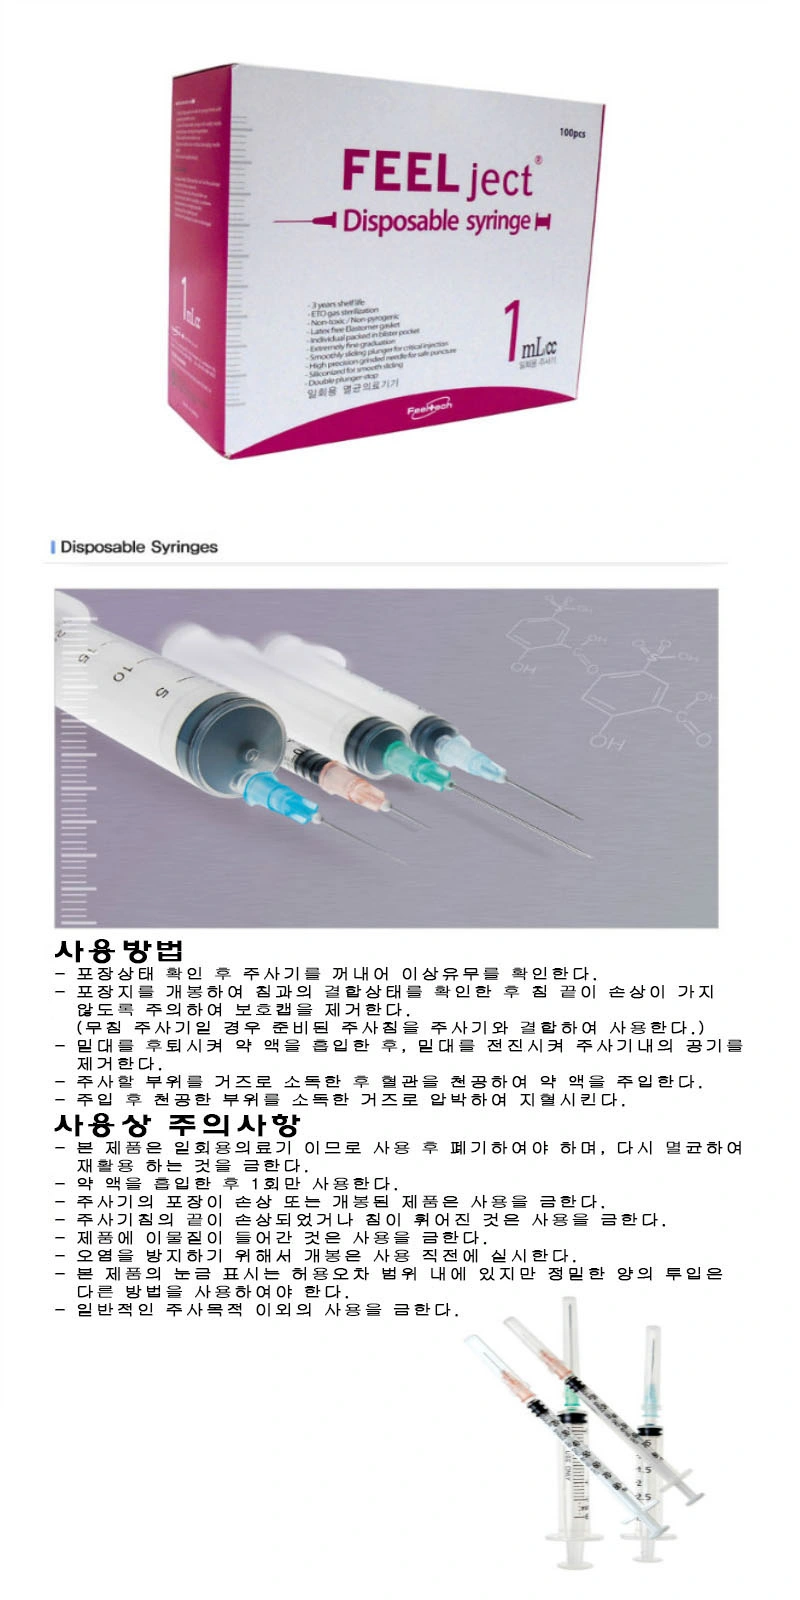 Disposable Retractable 3 Parts Luer Lock Safety Vaccination Syringe with Safety Needle